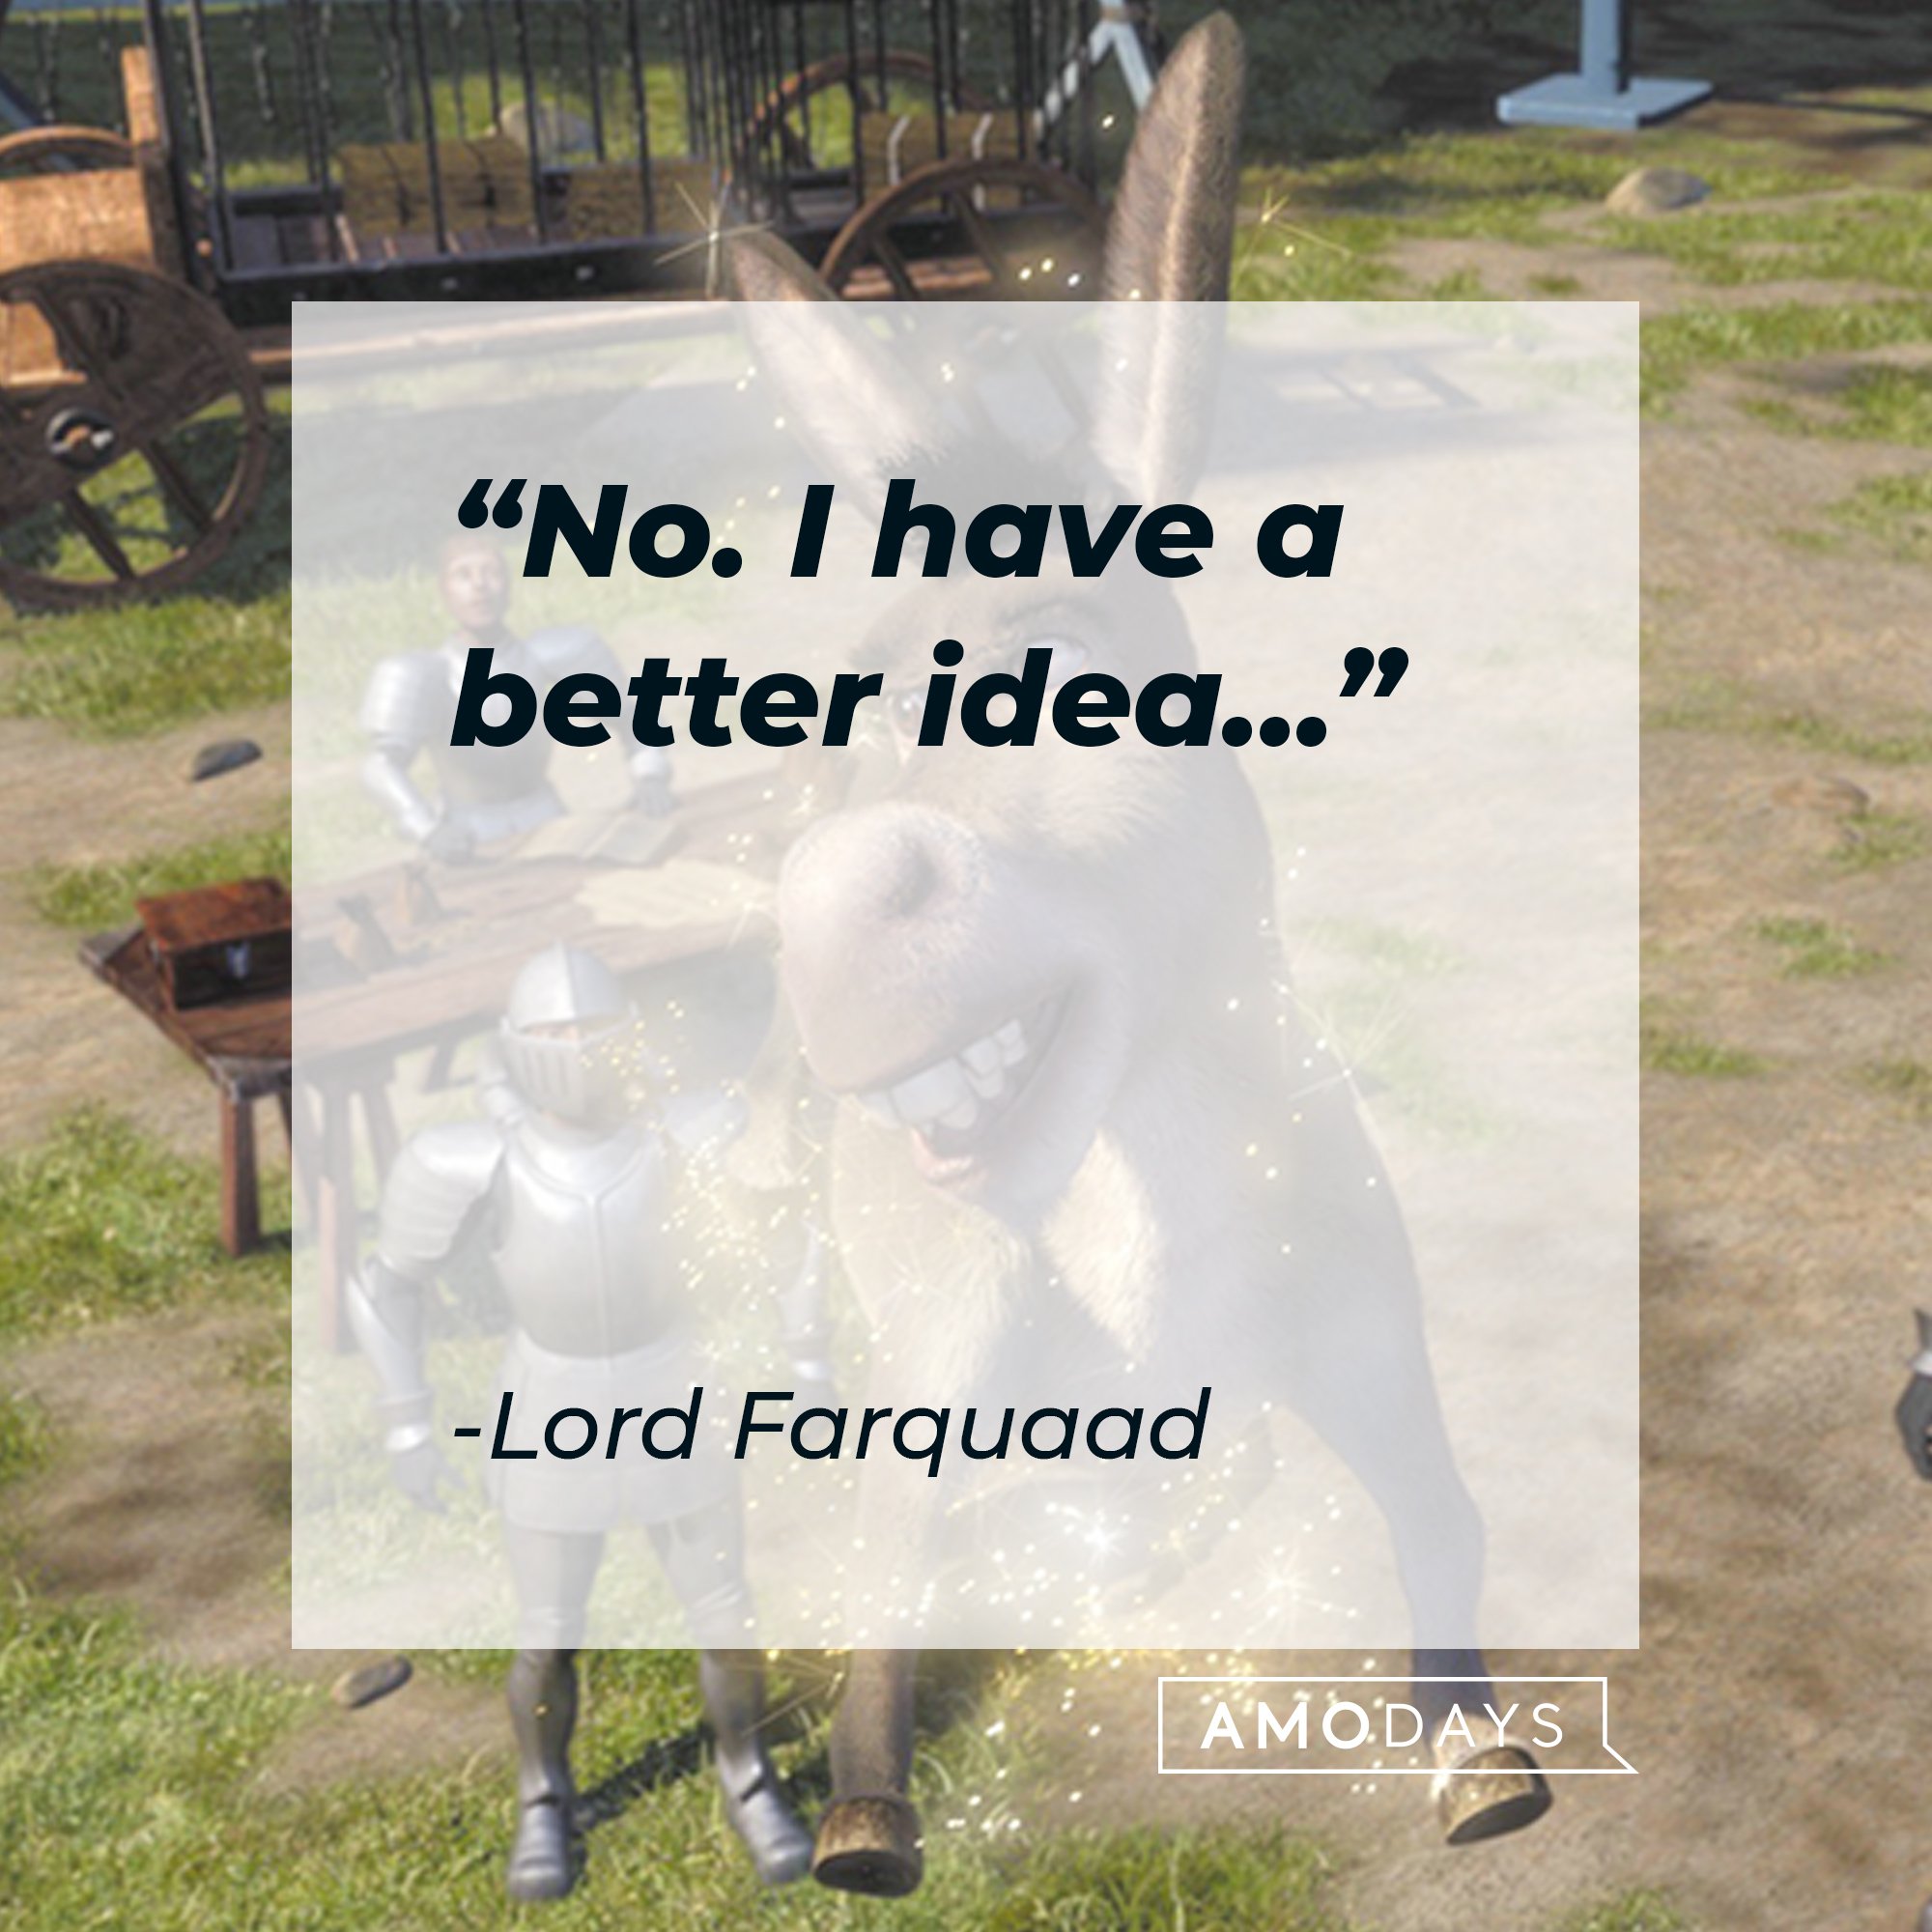 Lord Farquaad's quote: "No. I have a better idea..." | Image: AmoDays 